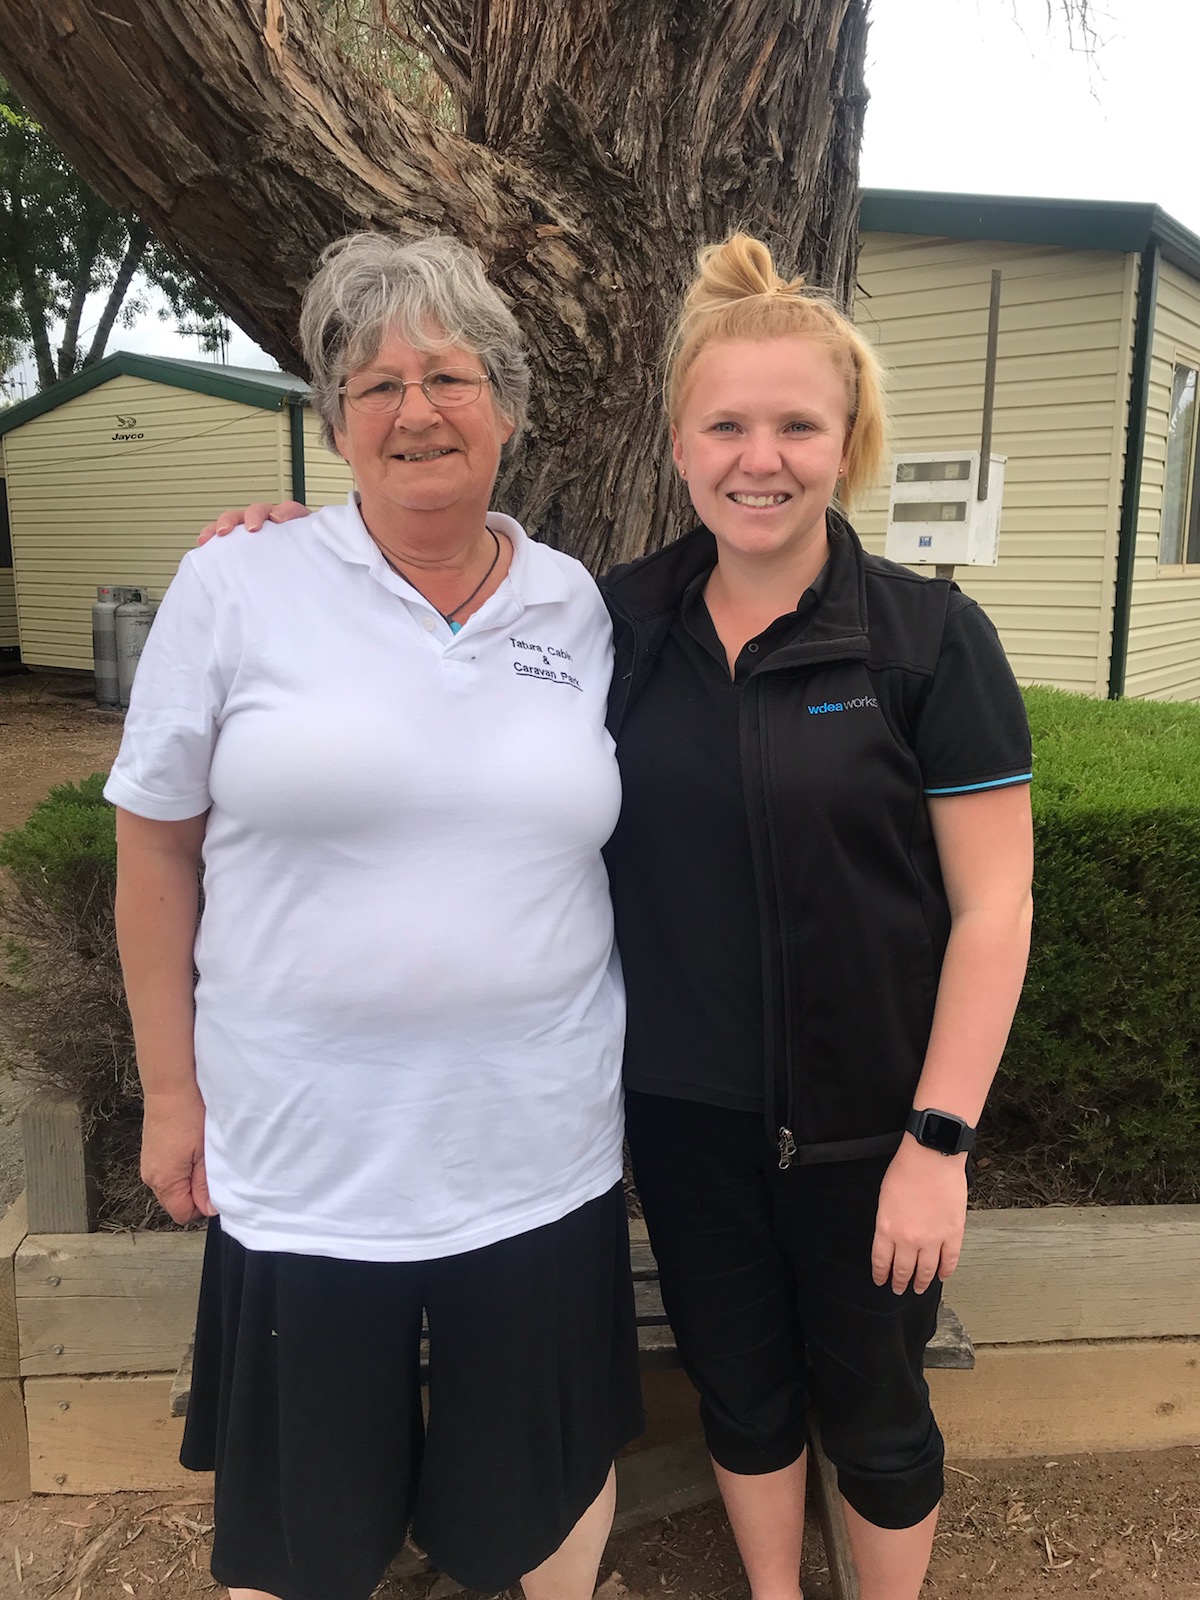 New job, new mindset for Christine thanks to are-able Shepparton & the Tatura Caravan Park